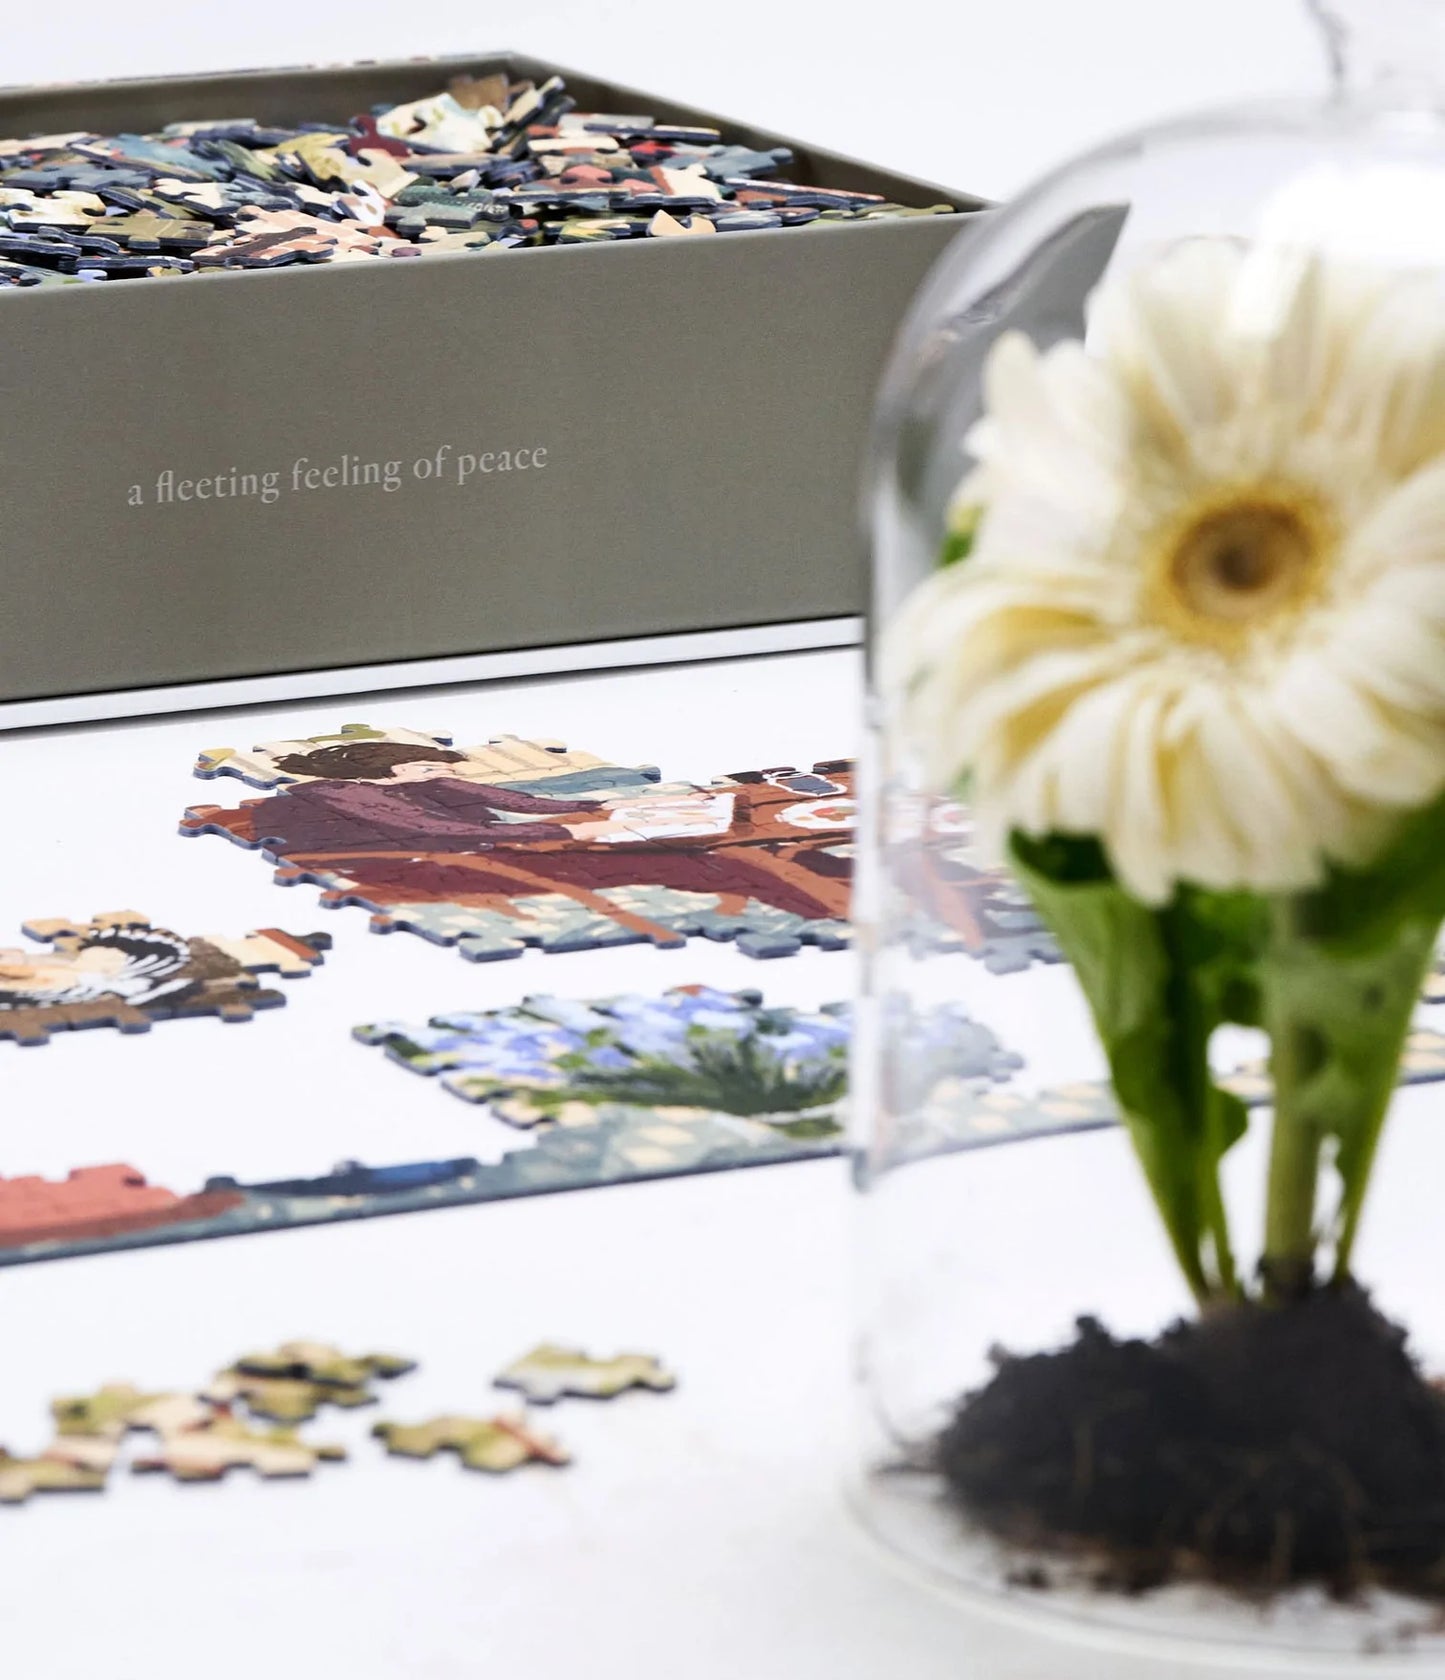 Load image into Gallery viewer, Jardin d’hiver Puzzle by Lida Ziruffo
